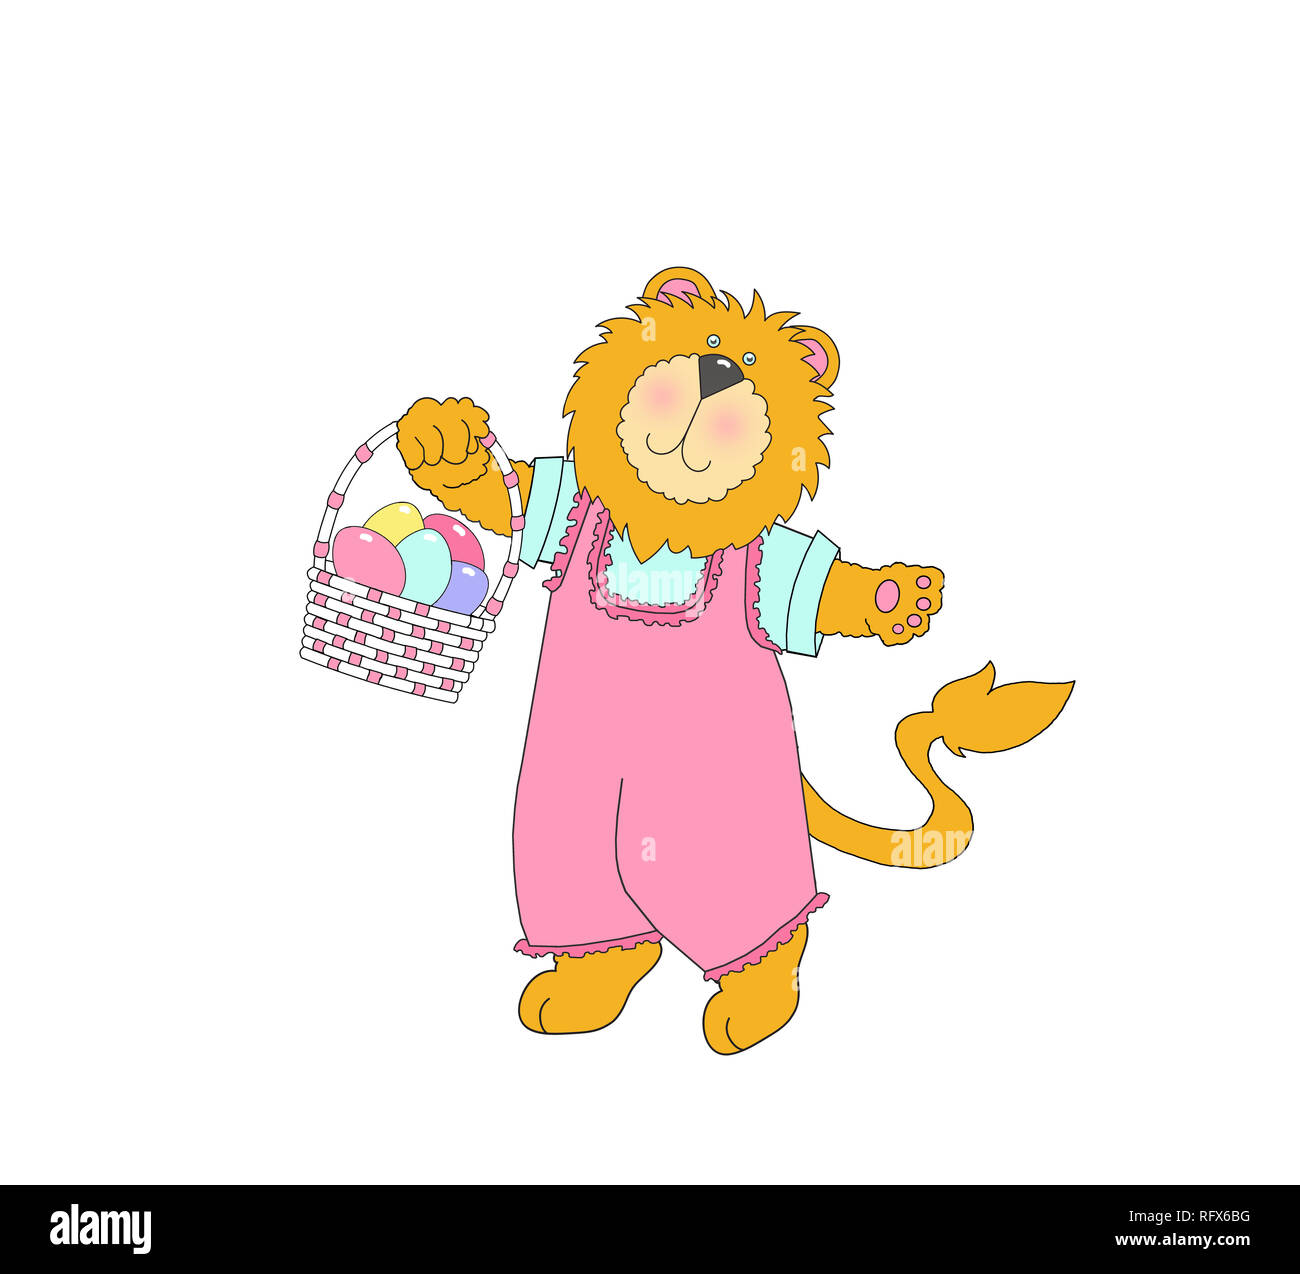 Illustration of a cute lion wearing clothes and carrying an Easter basket on a white background Stock Photo